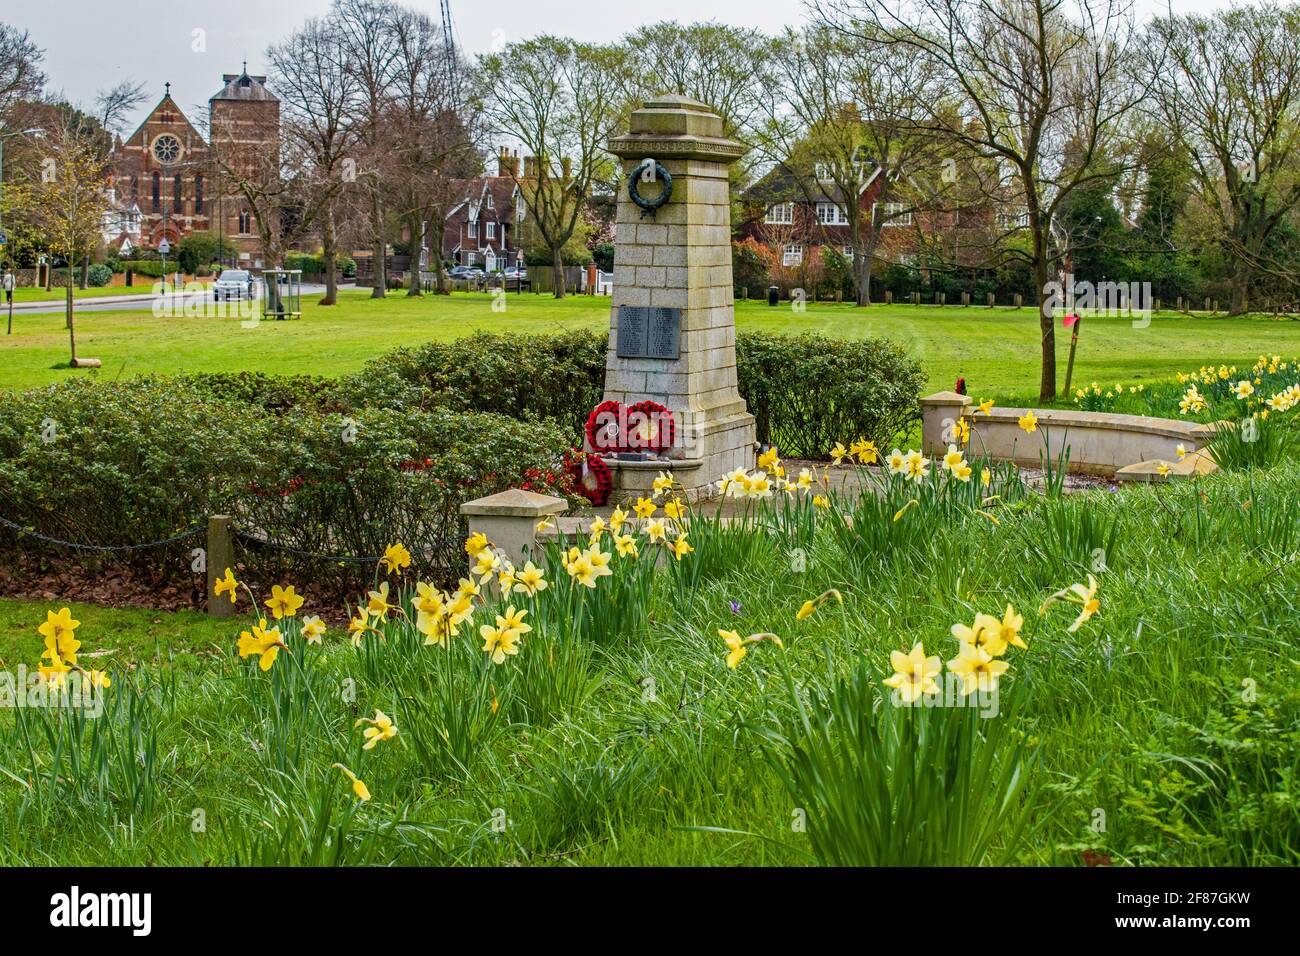 War memorial in spring time, Sidcup, Kent, England Stock Photo